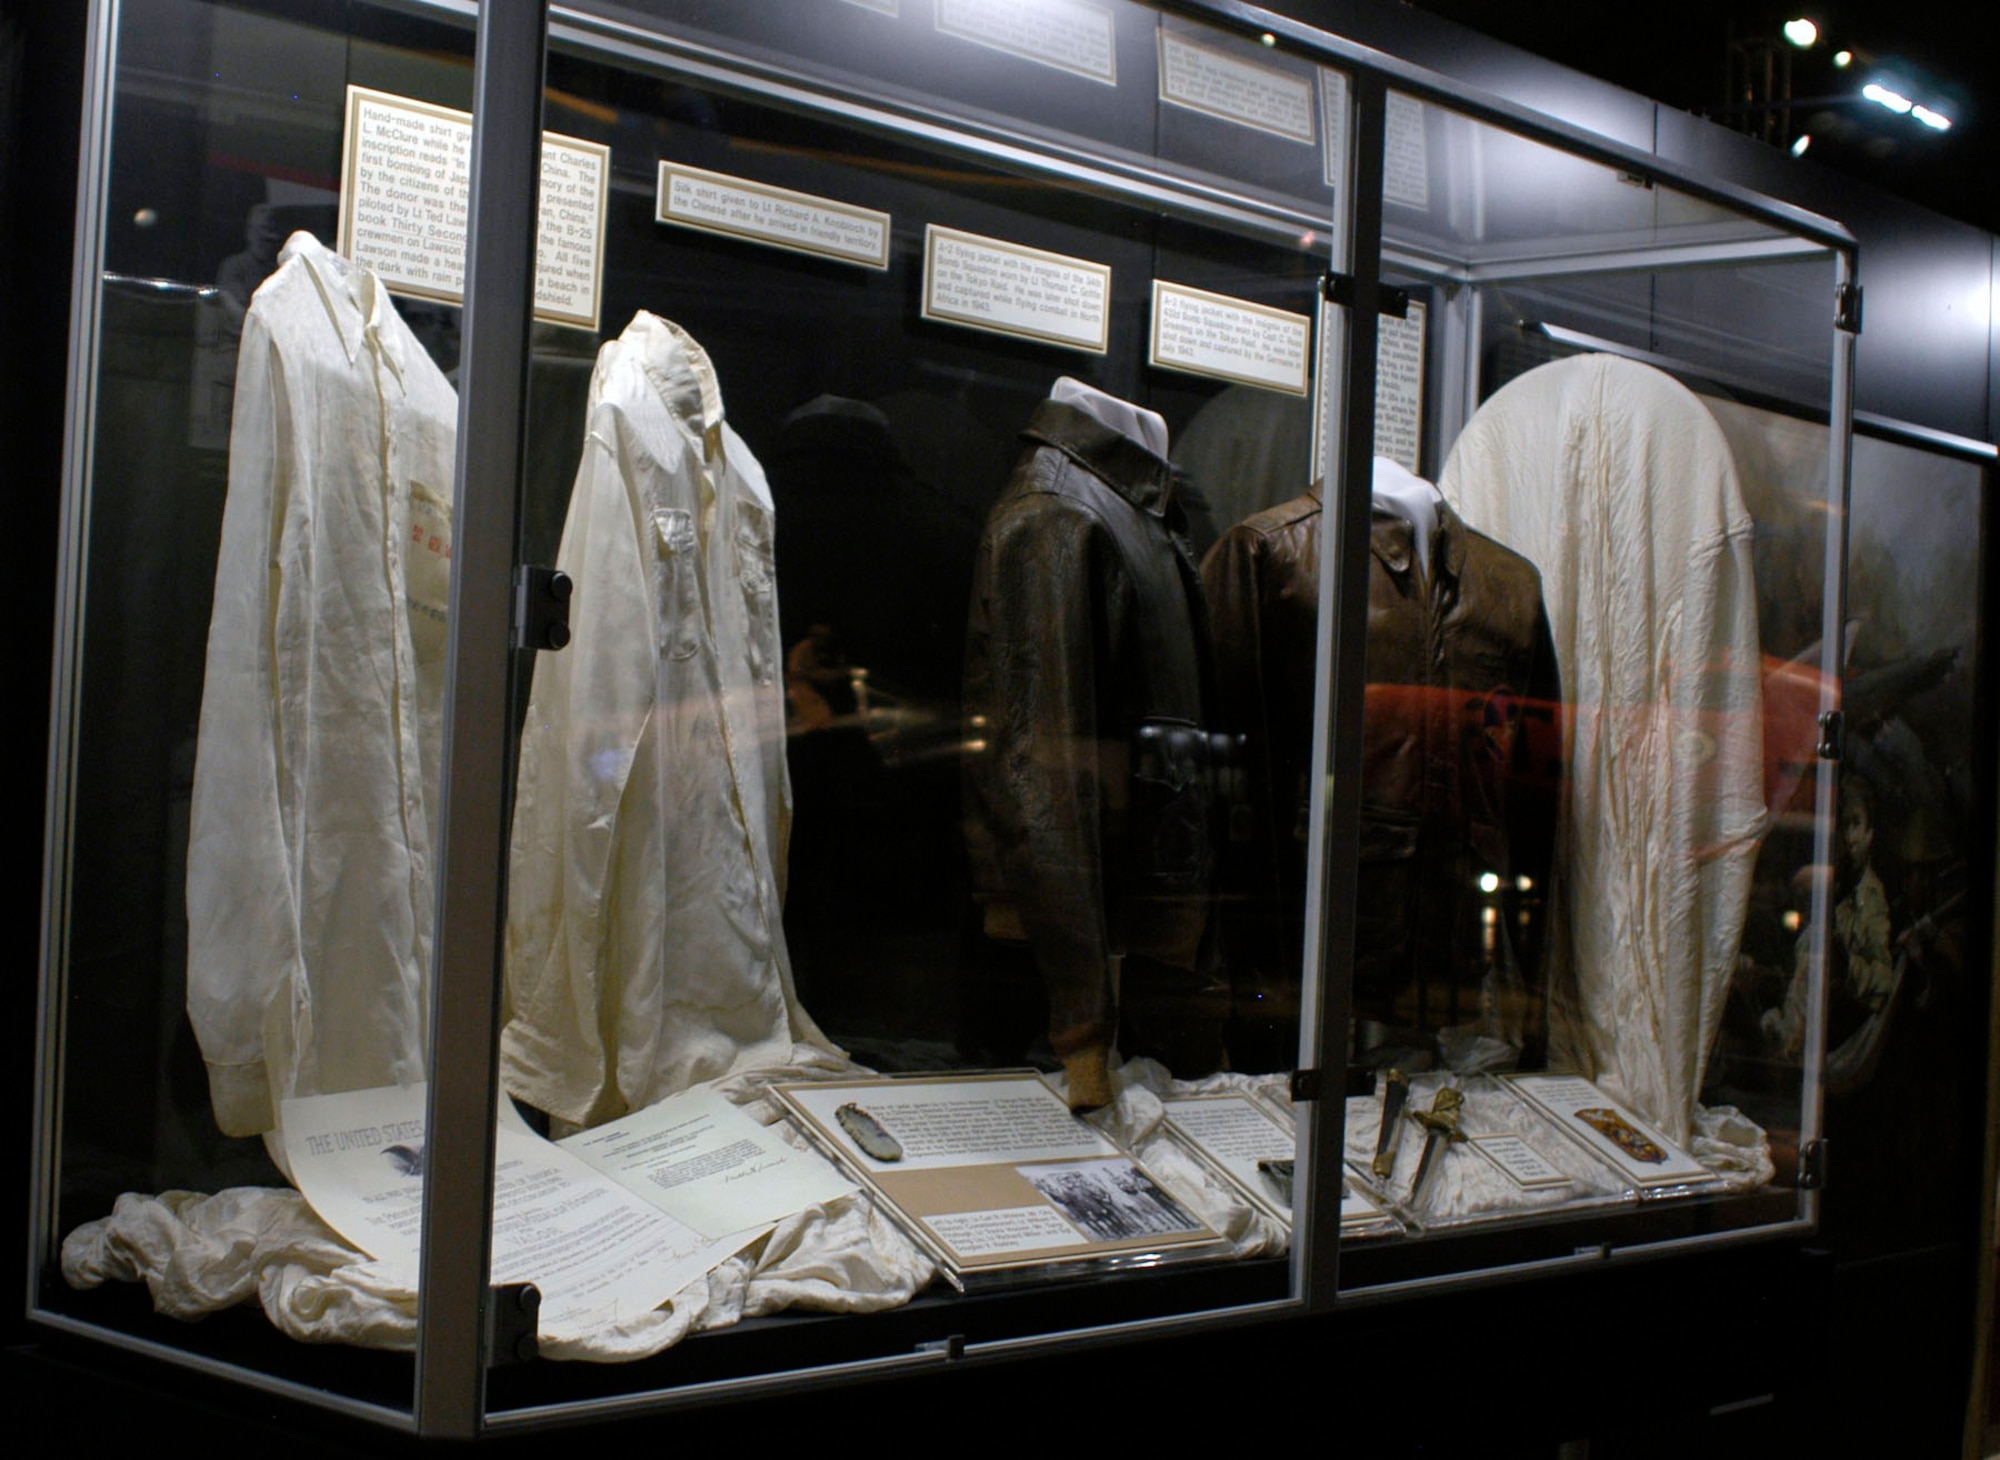 DAYTON, Ohio -- Silk Shirts Worn by Raiders (left) and Raiders Flying Jackets (right) on display in the World War II Gallery at the National Museum of the U.S. Air Force. (U.S. Air Force photo)